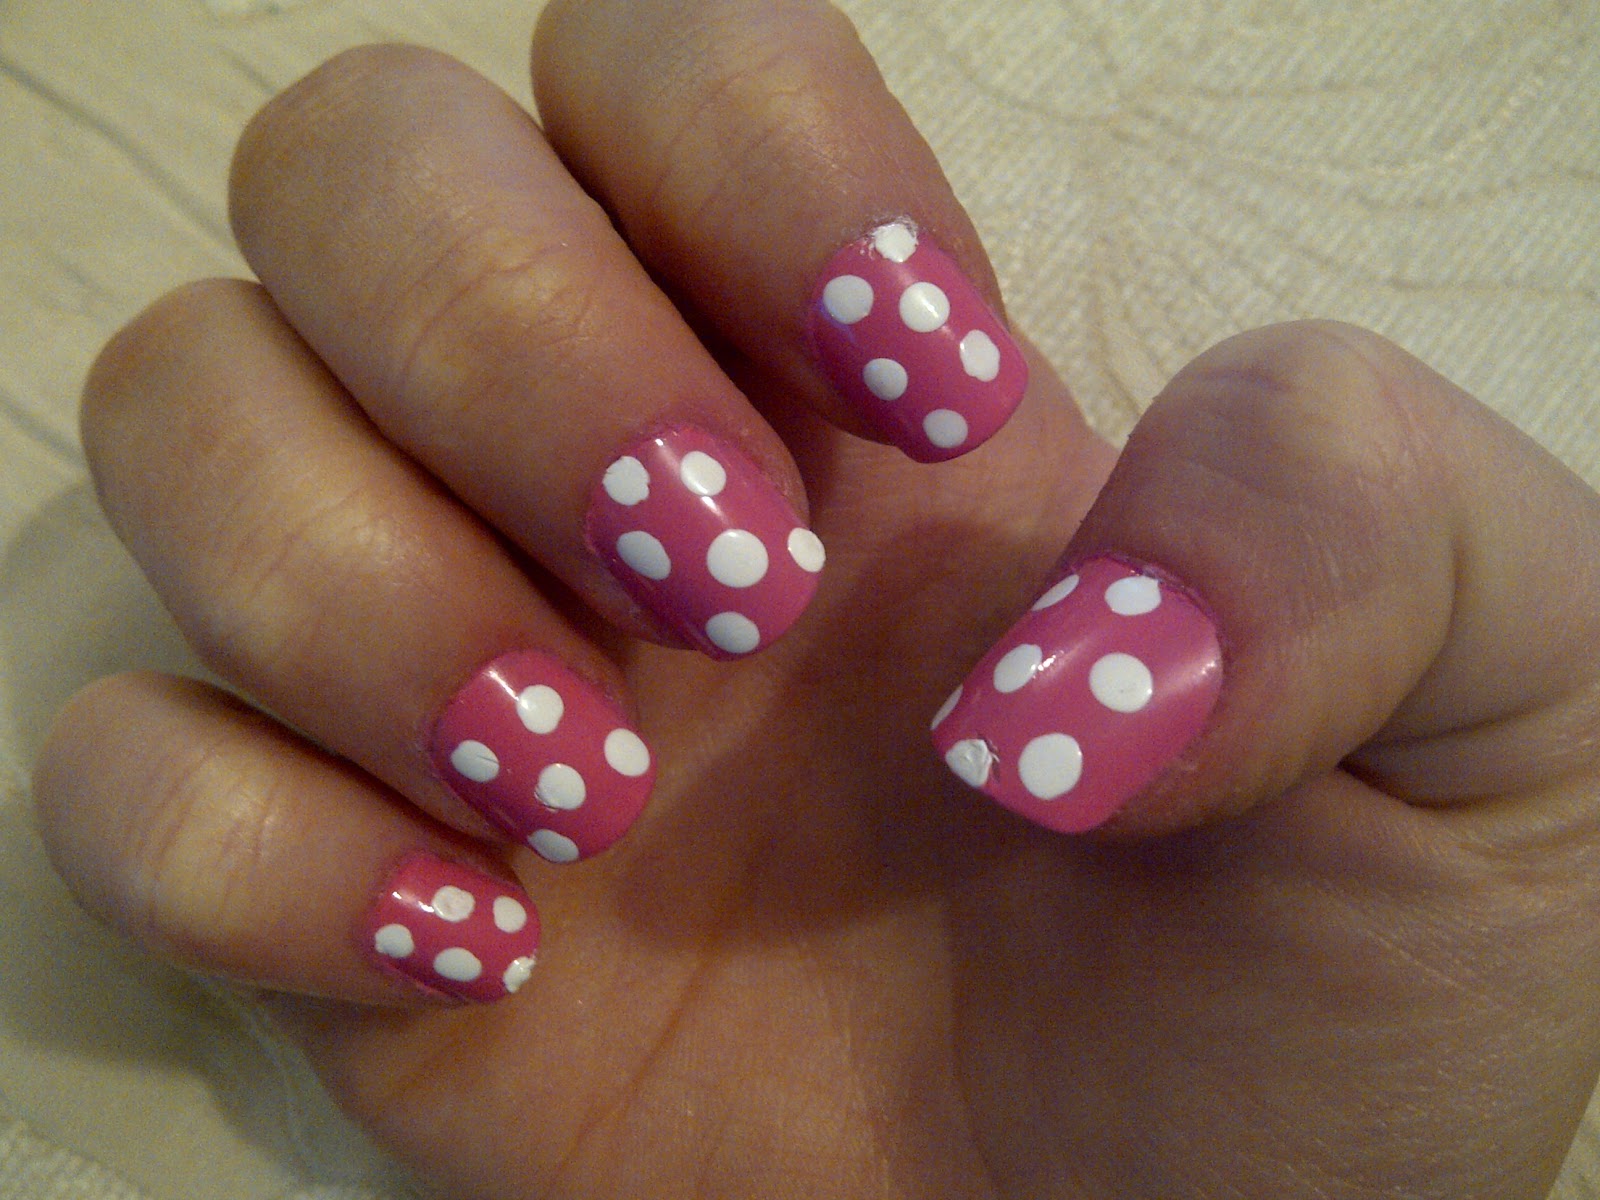 9. Minnie Mouse Nail Art with Rhinestones - wide 2